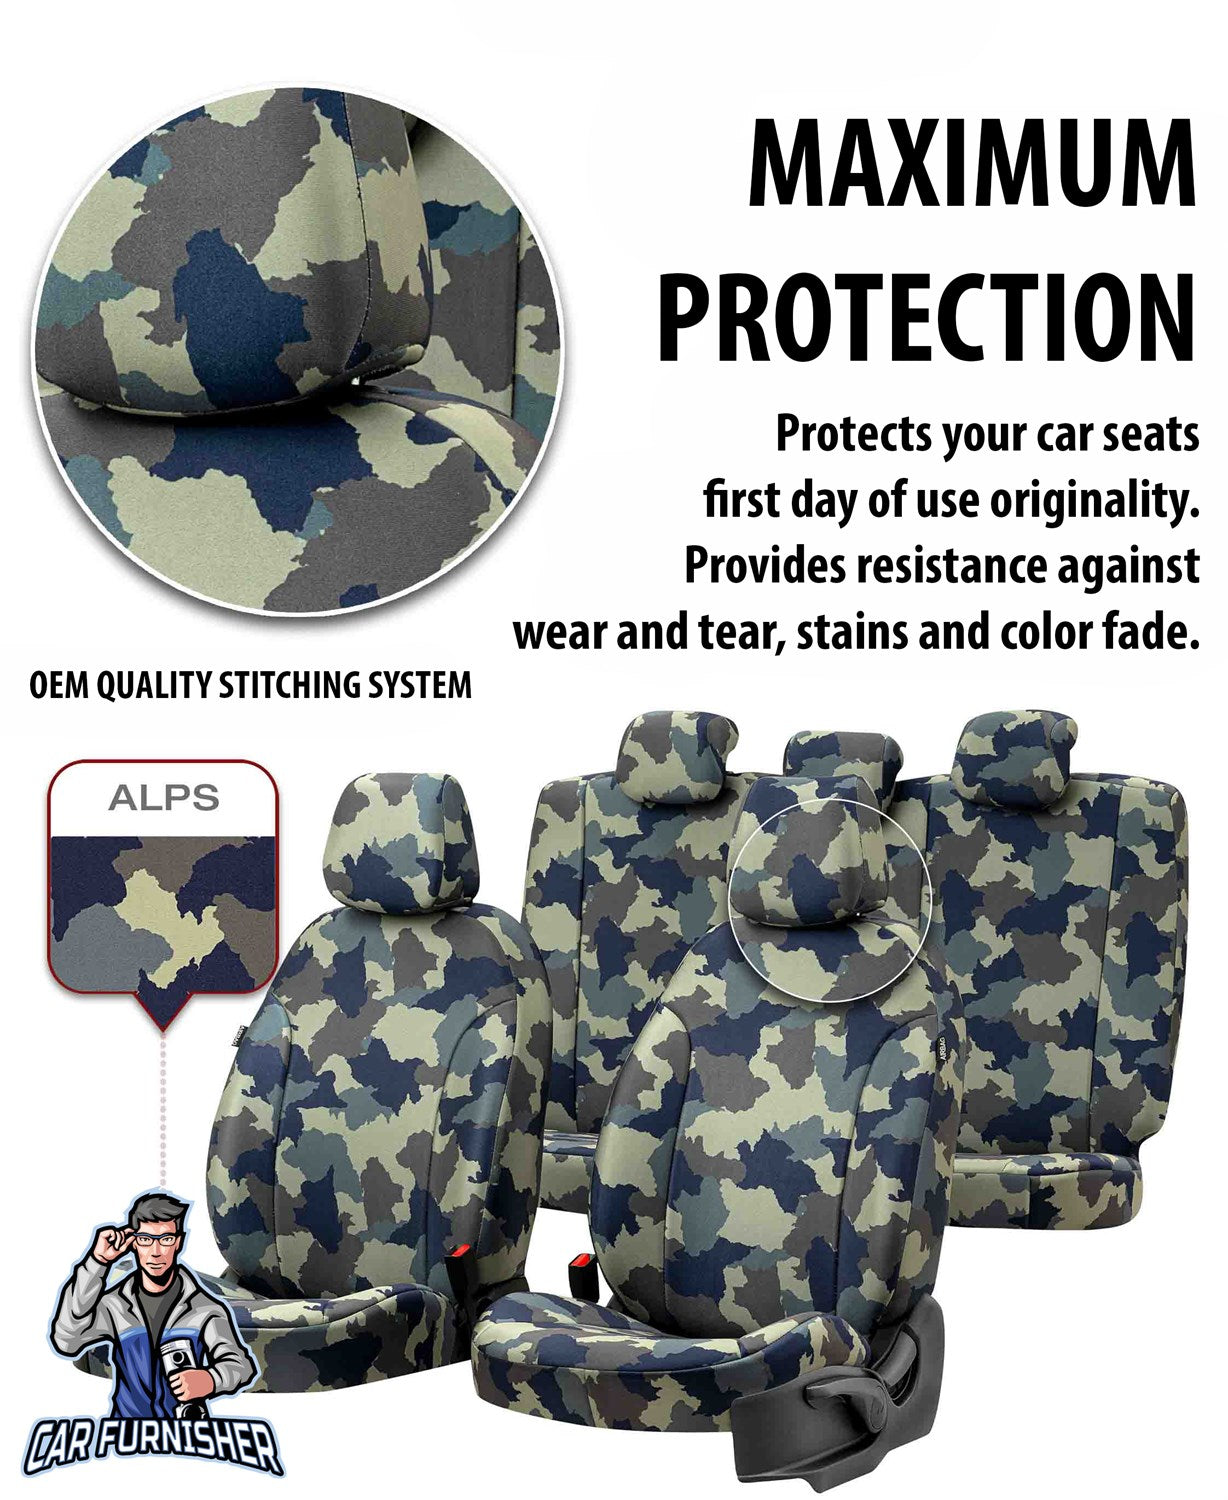 Ford S-Max Seat Covers Camouflage Waterproof Design Everest Camo Waterproof Fabric